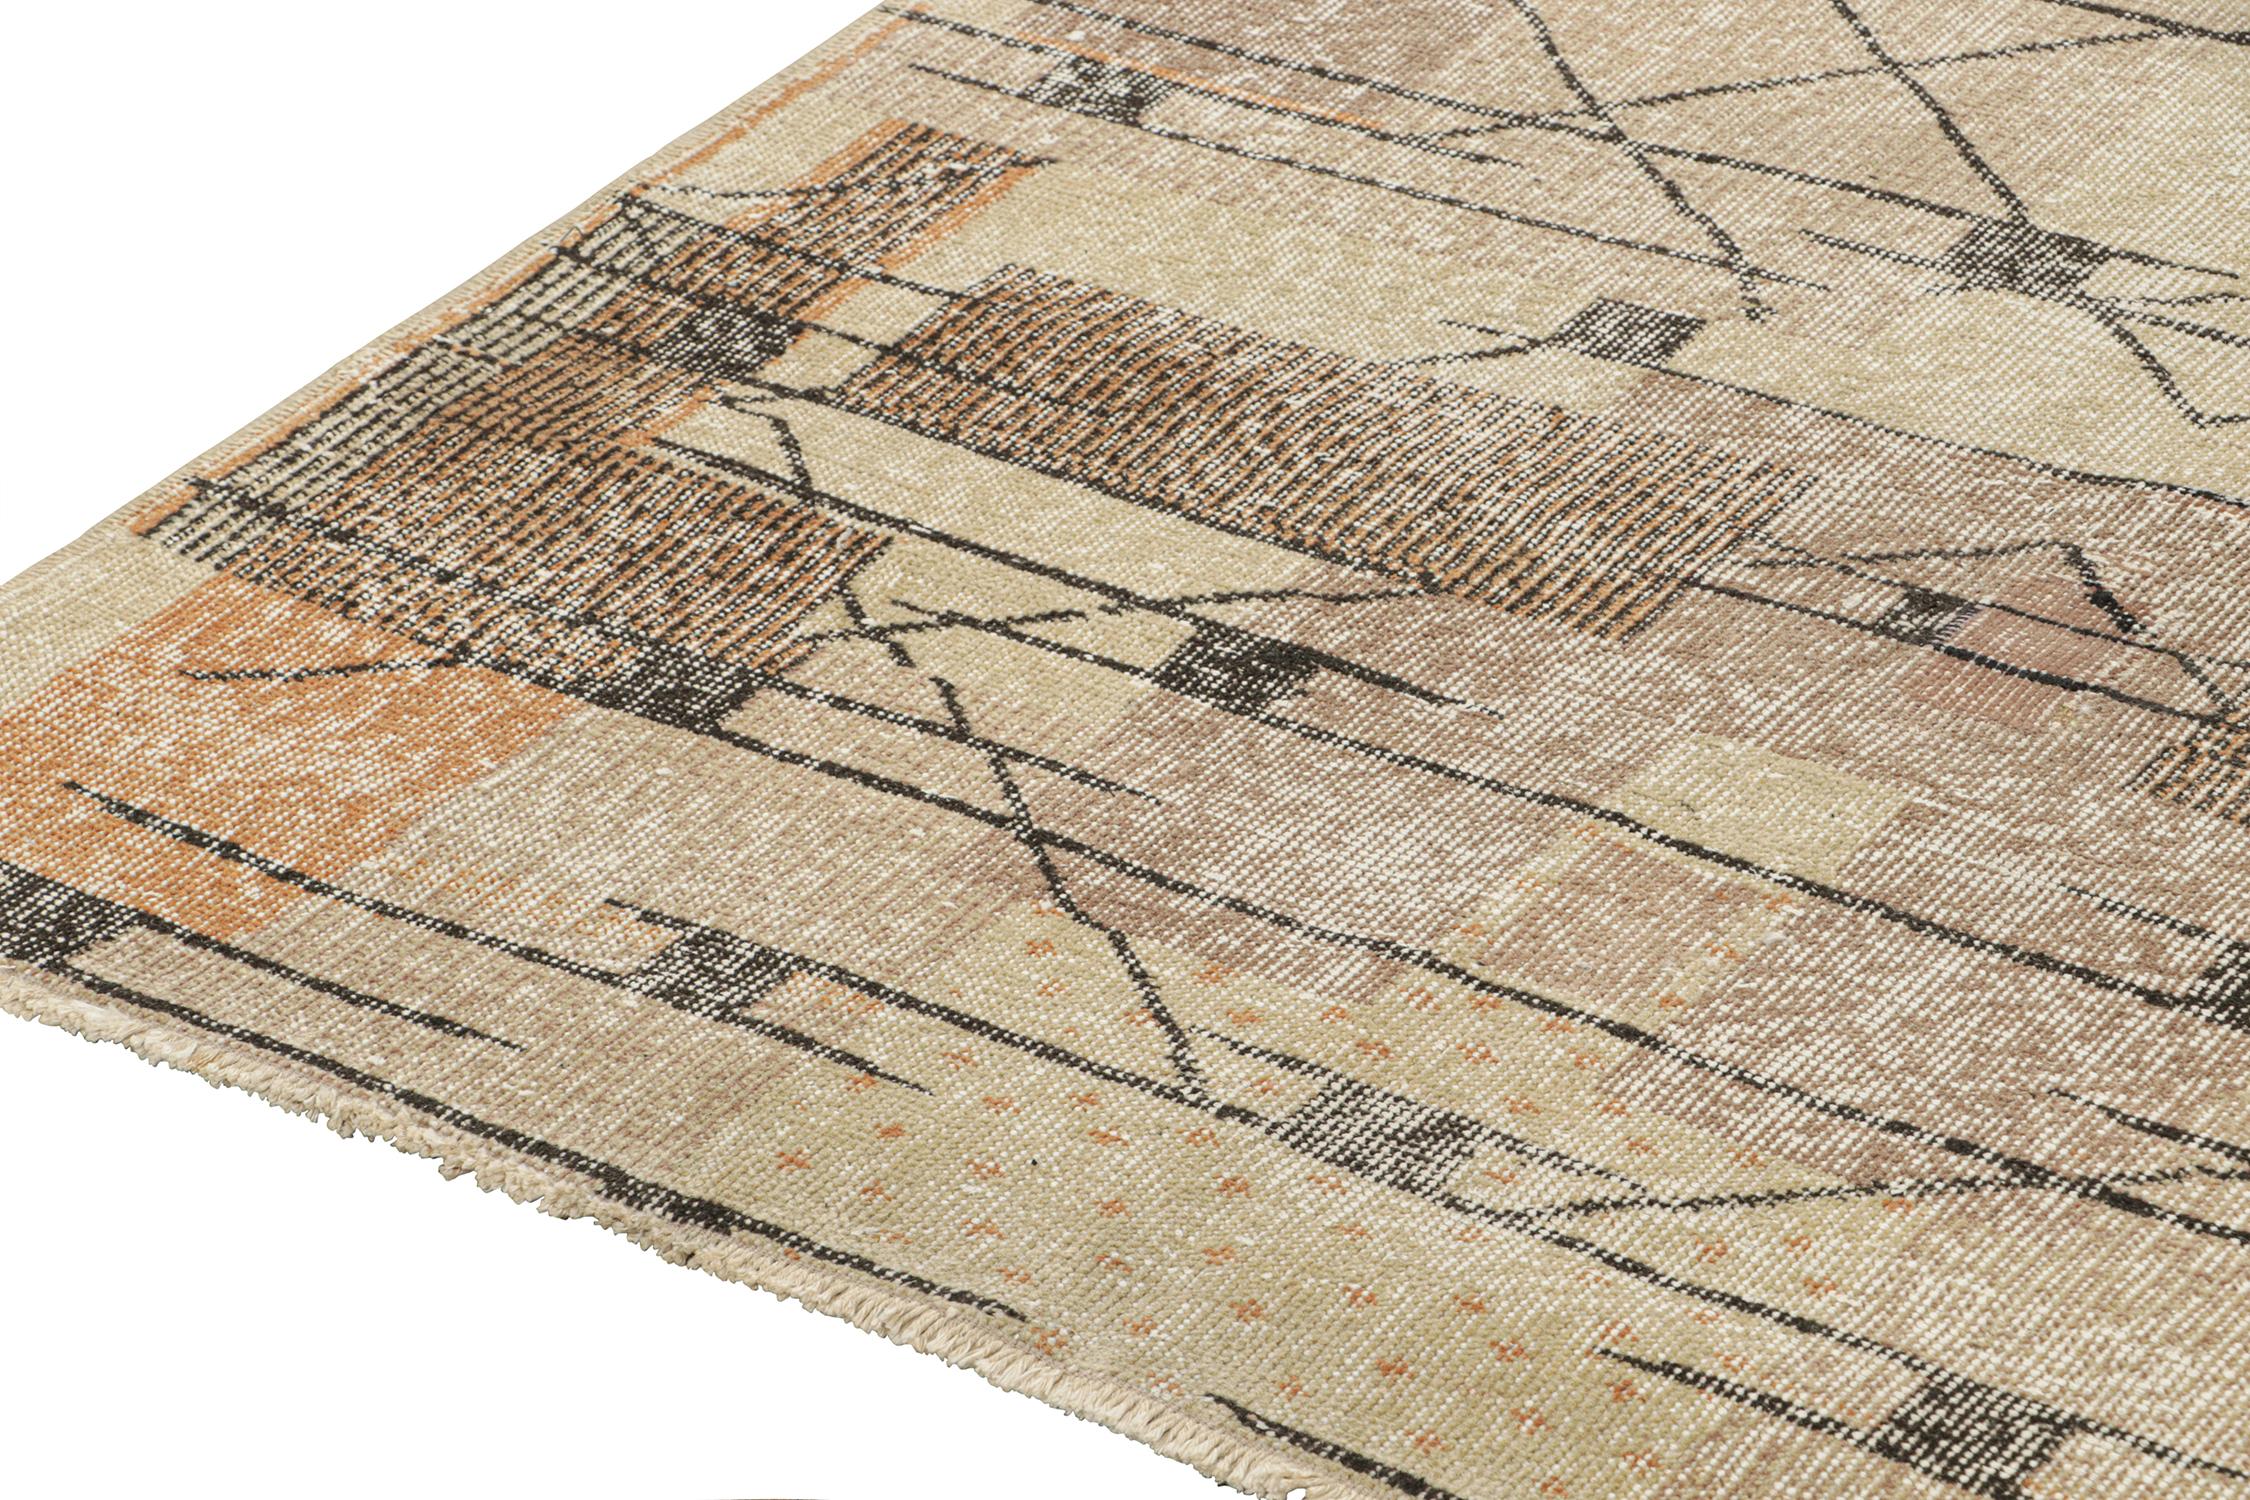 Hand-Knotted Vintage Zeki Müren Rug in Beige-Brown with Geometric Patterns by Rug & Kilim For Sale